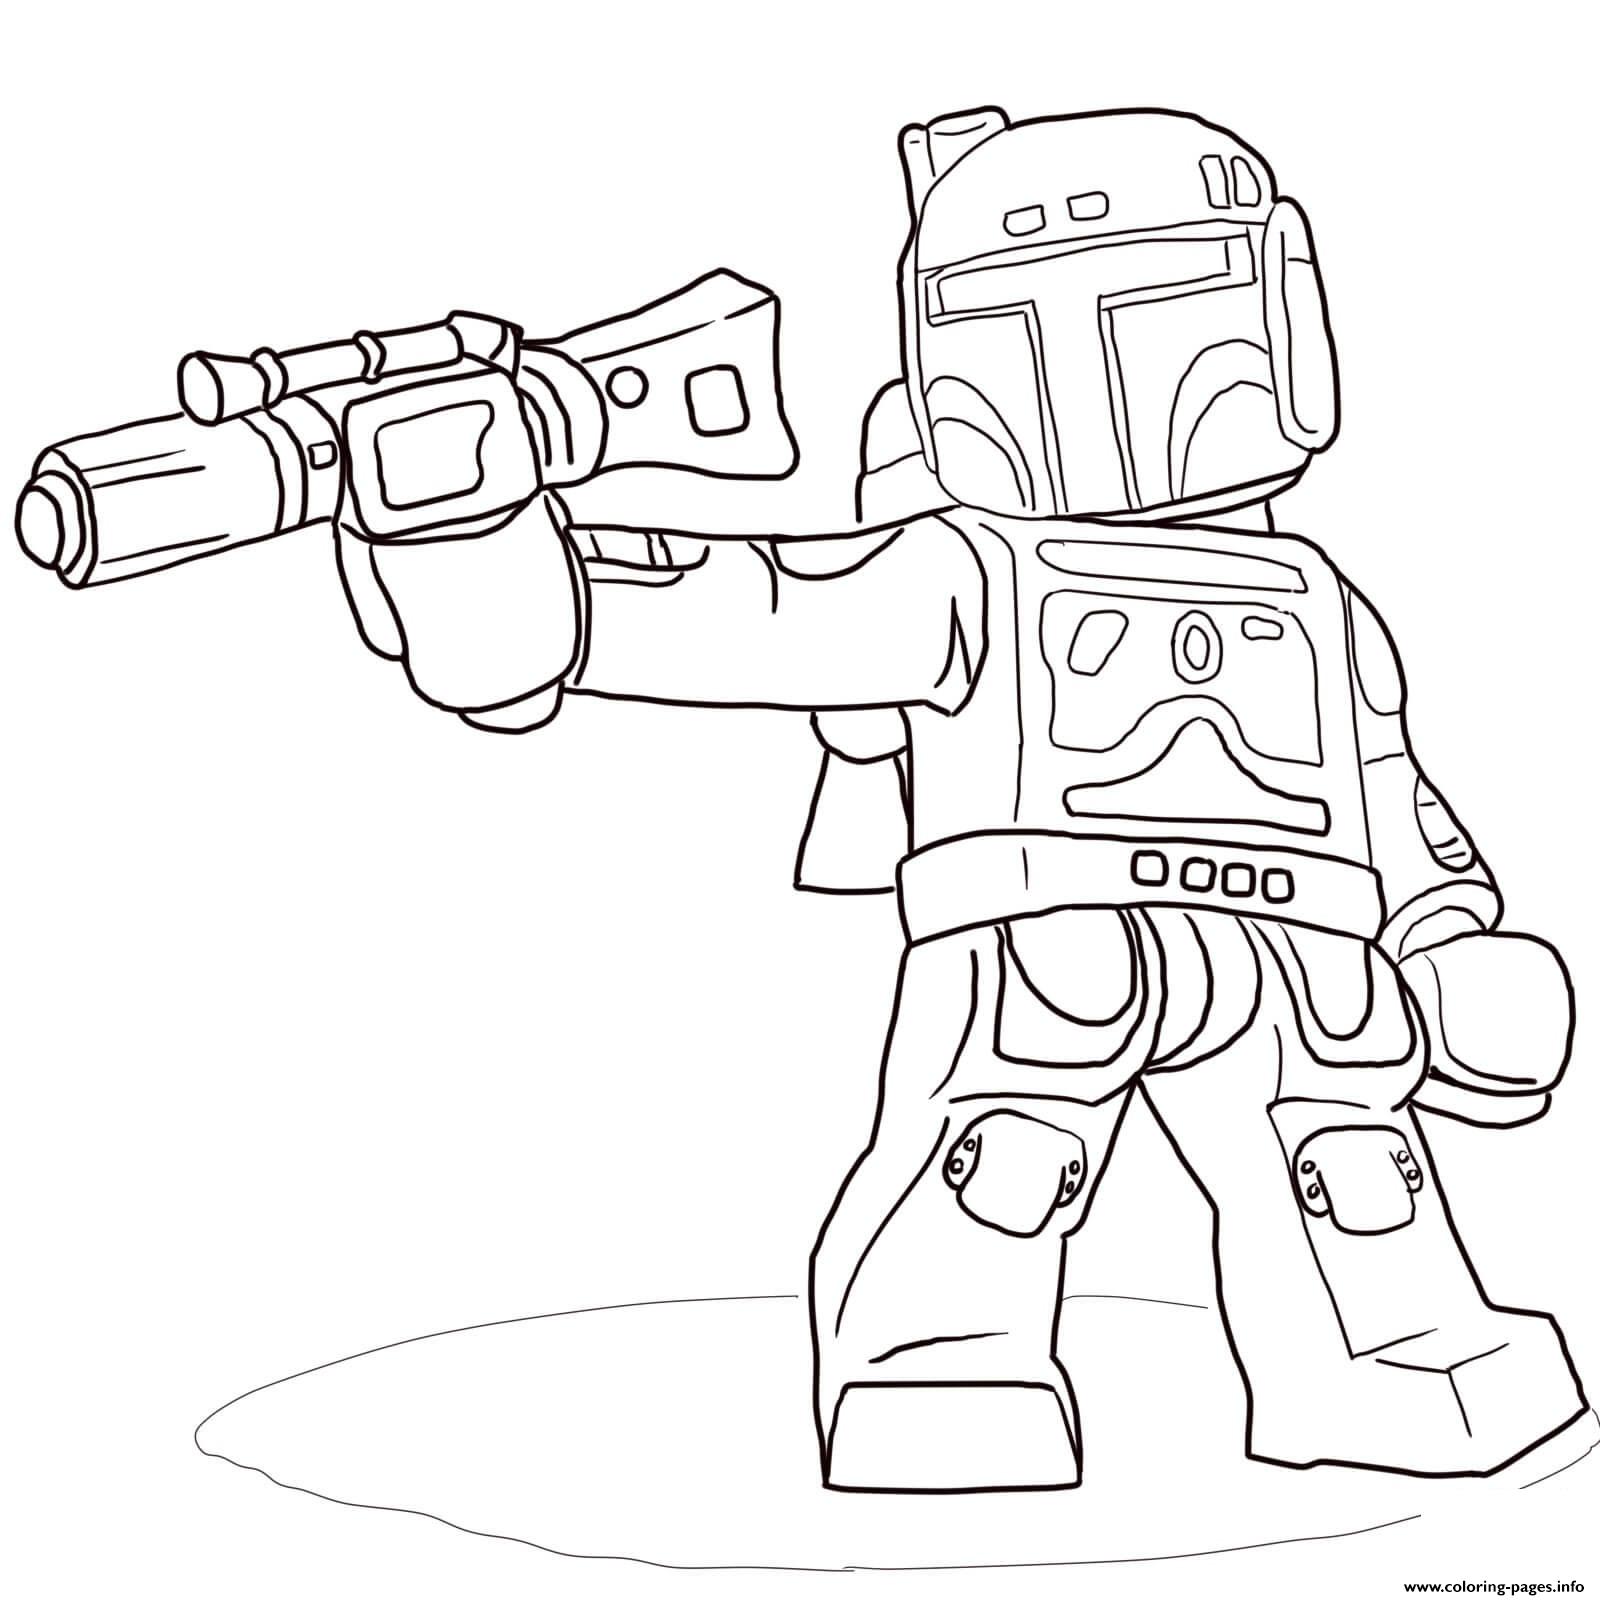 Lego Star Wars Boba Fett Coloring Pages Printable